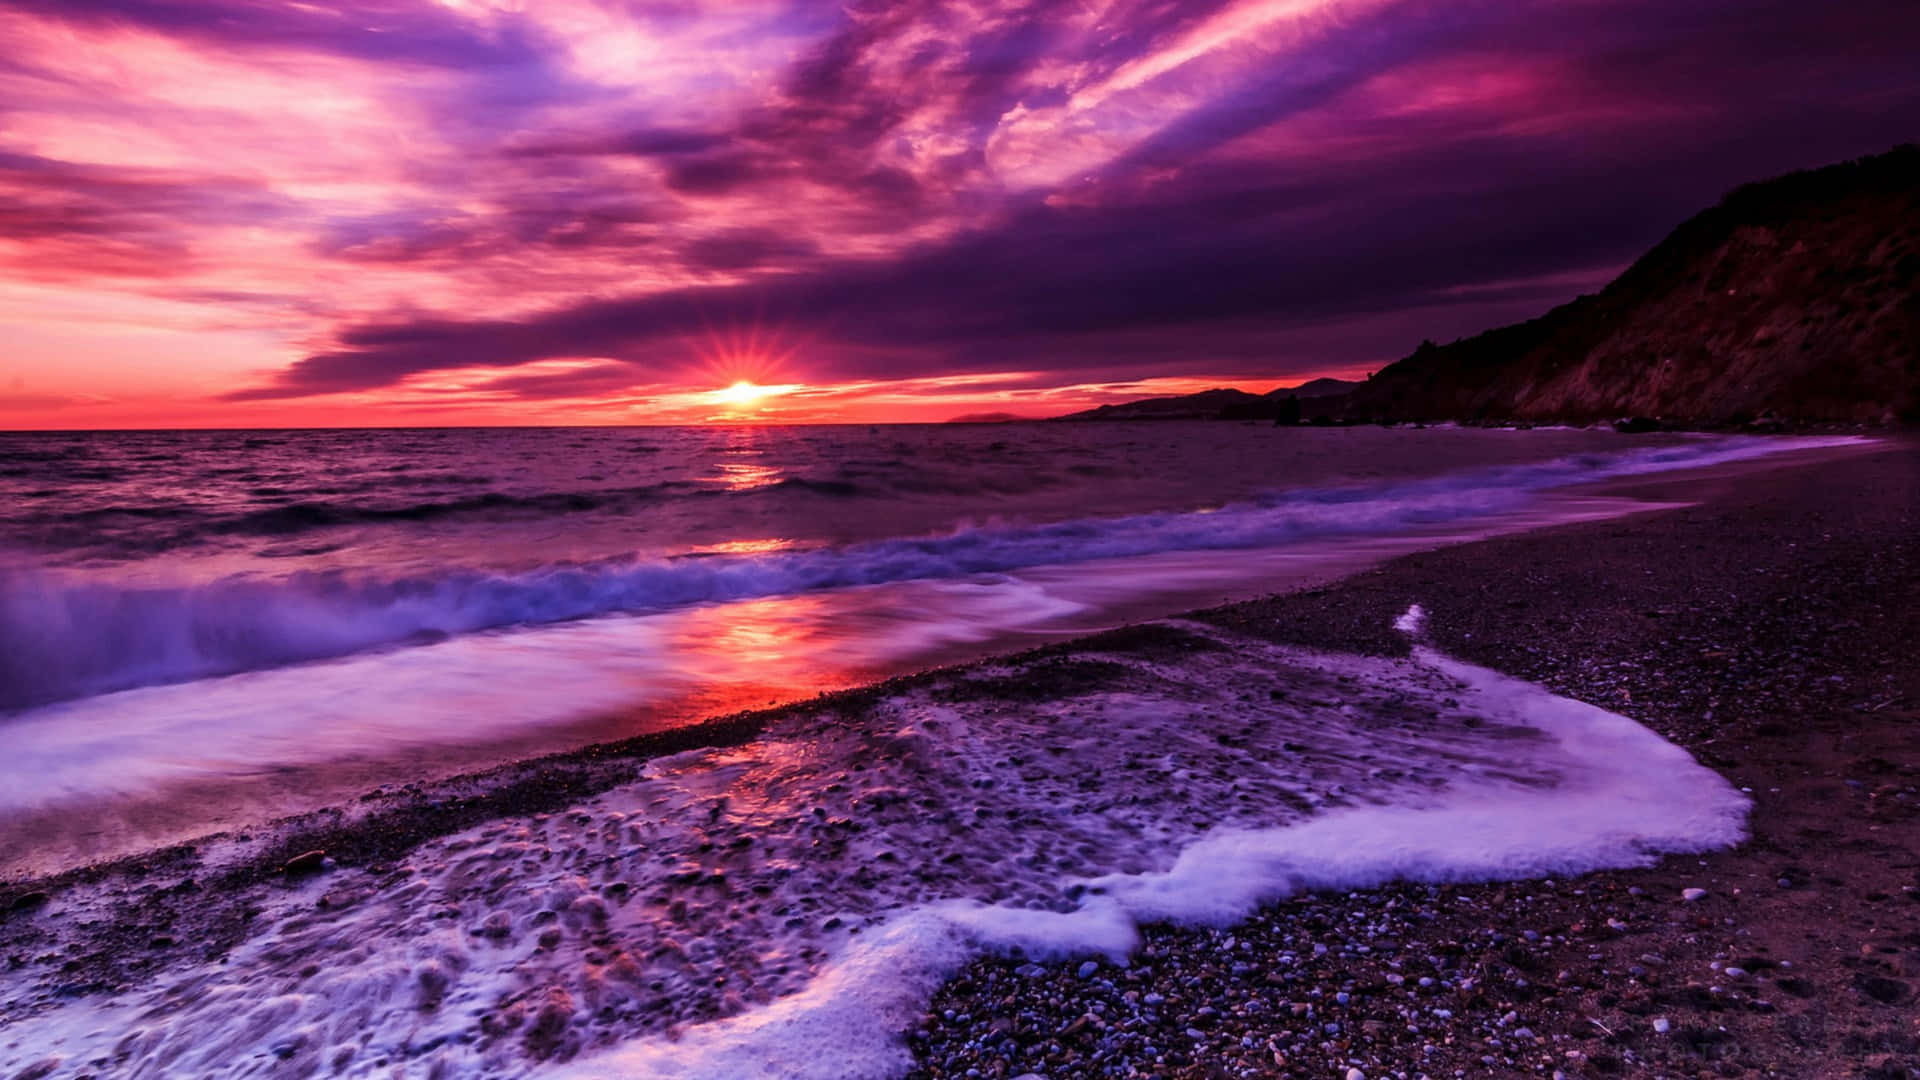 A Majestic and Colorful Sunset Over the Sea